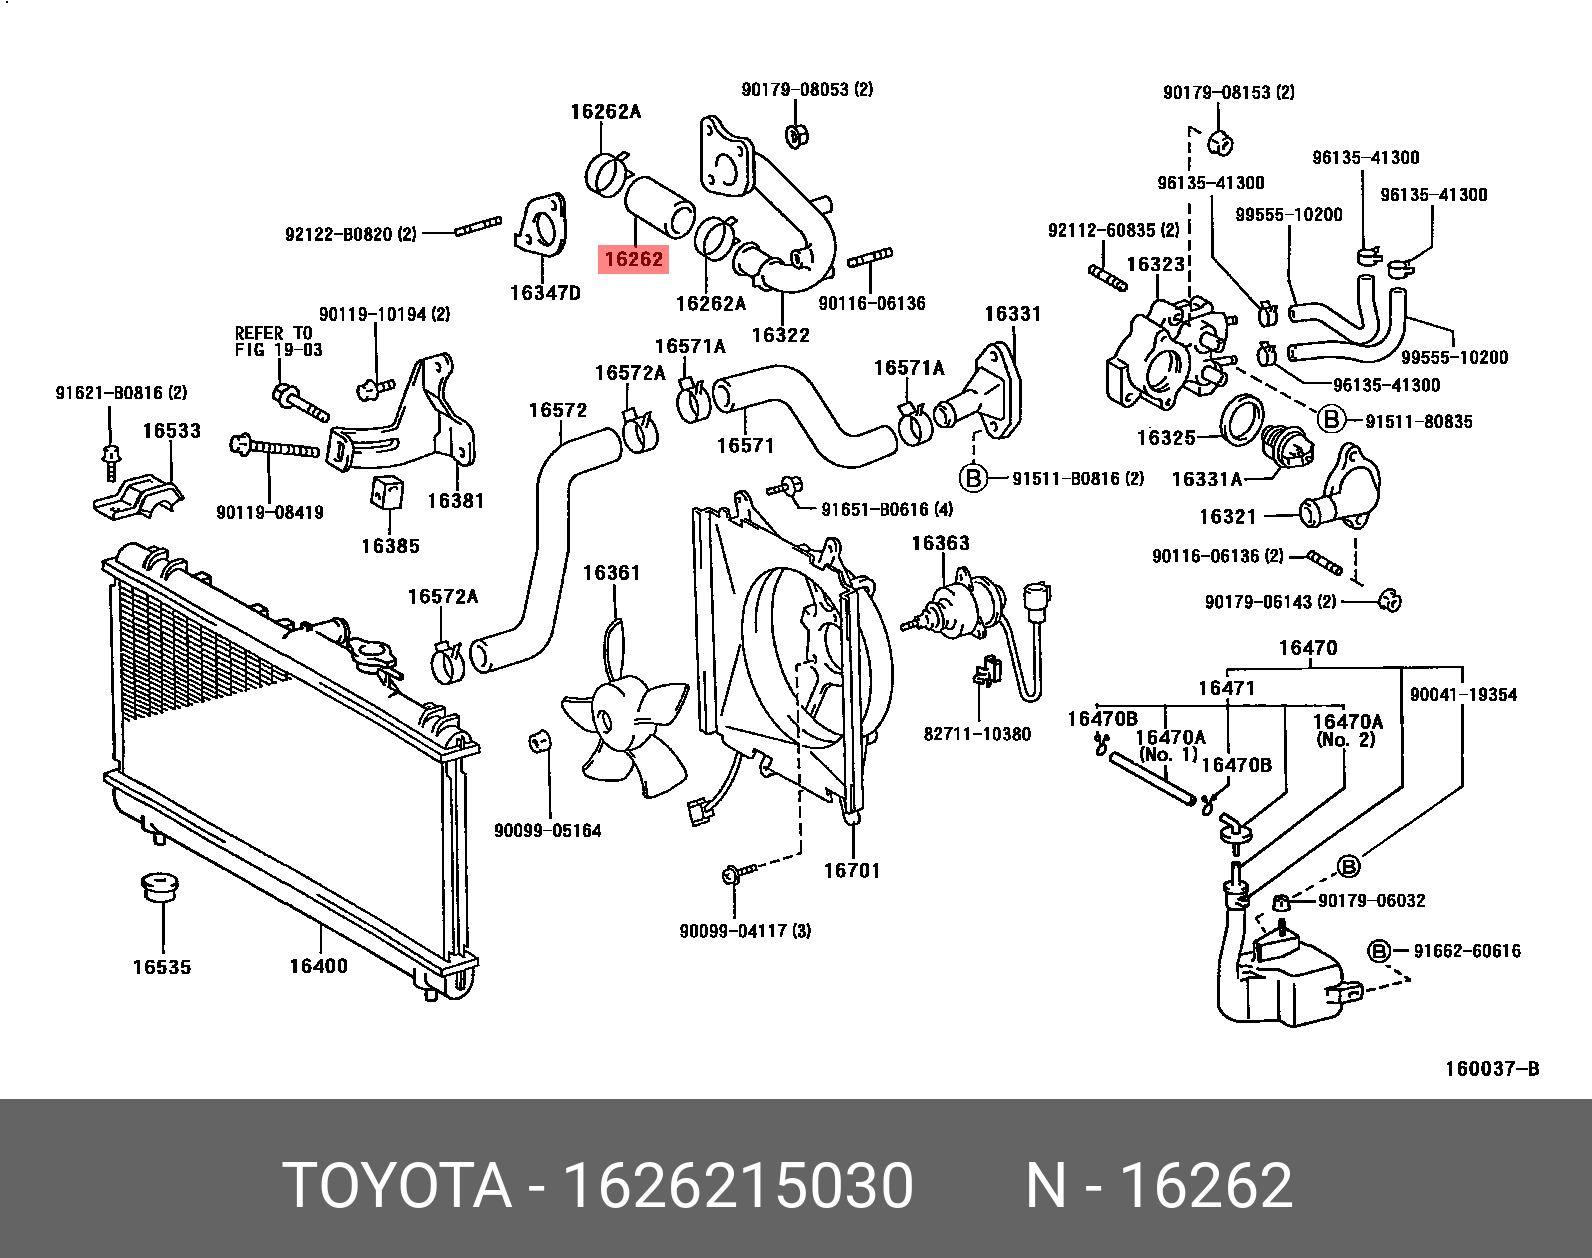 COROLLA LEVIN 198705 - 199106, HOSE, WATER INLET